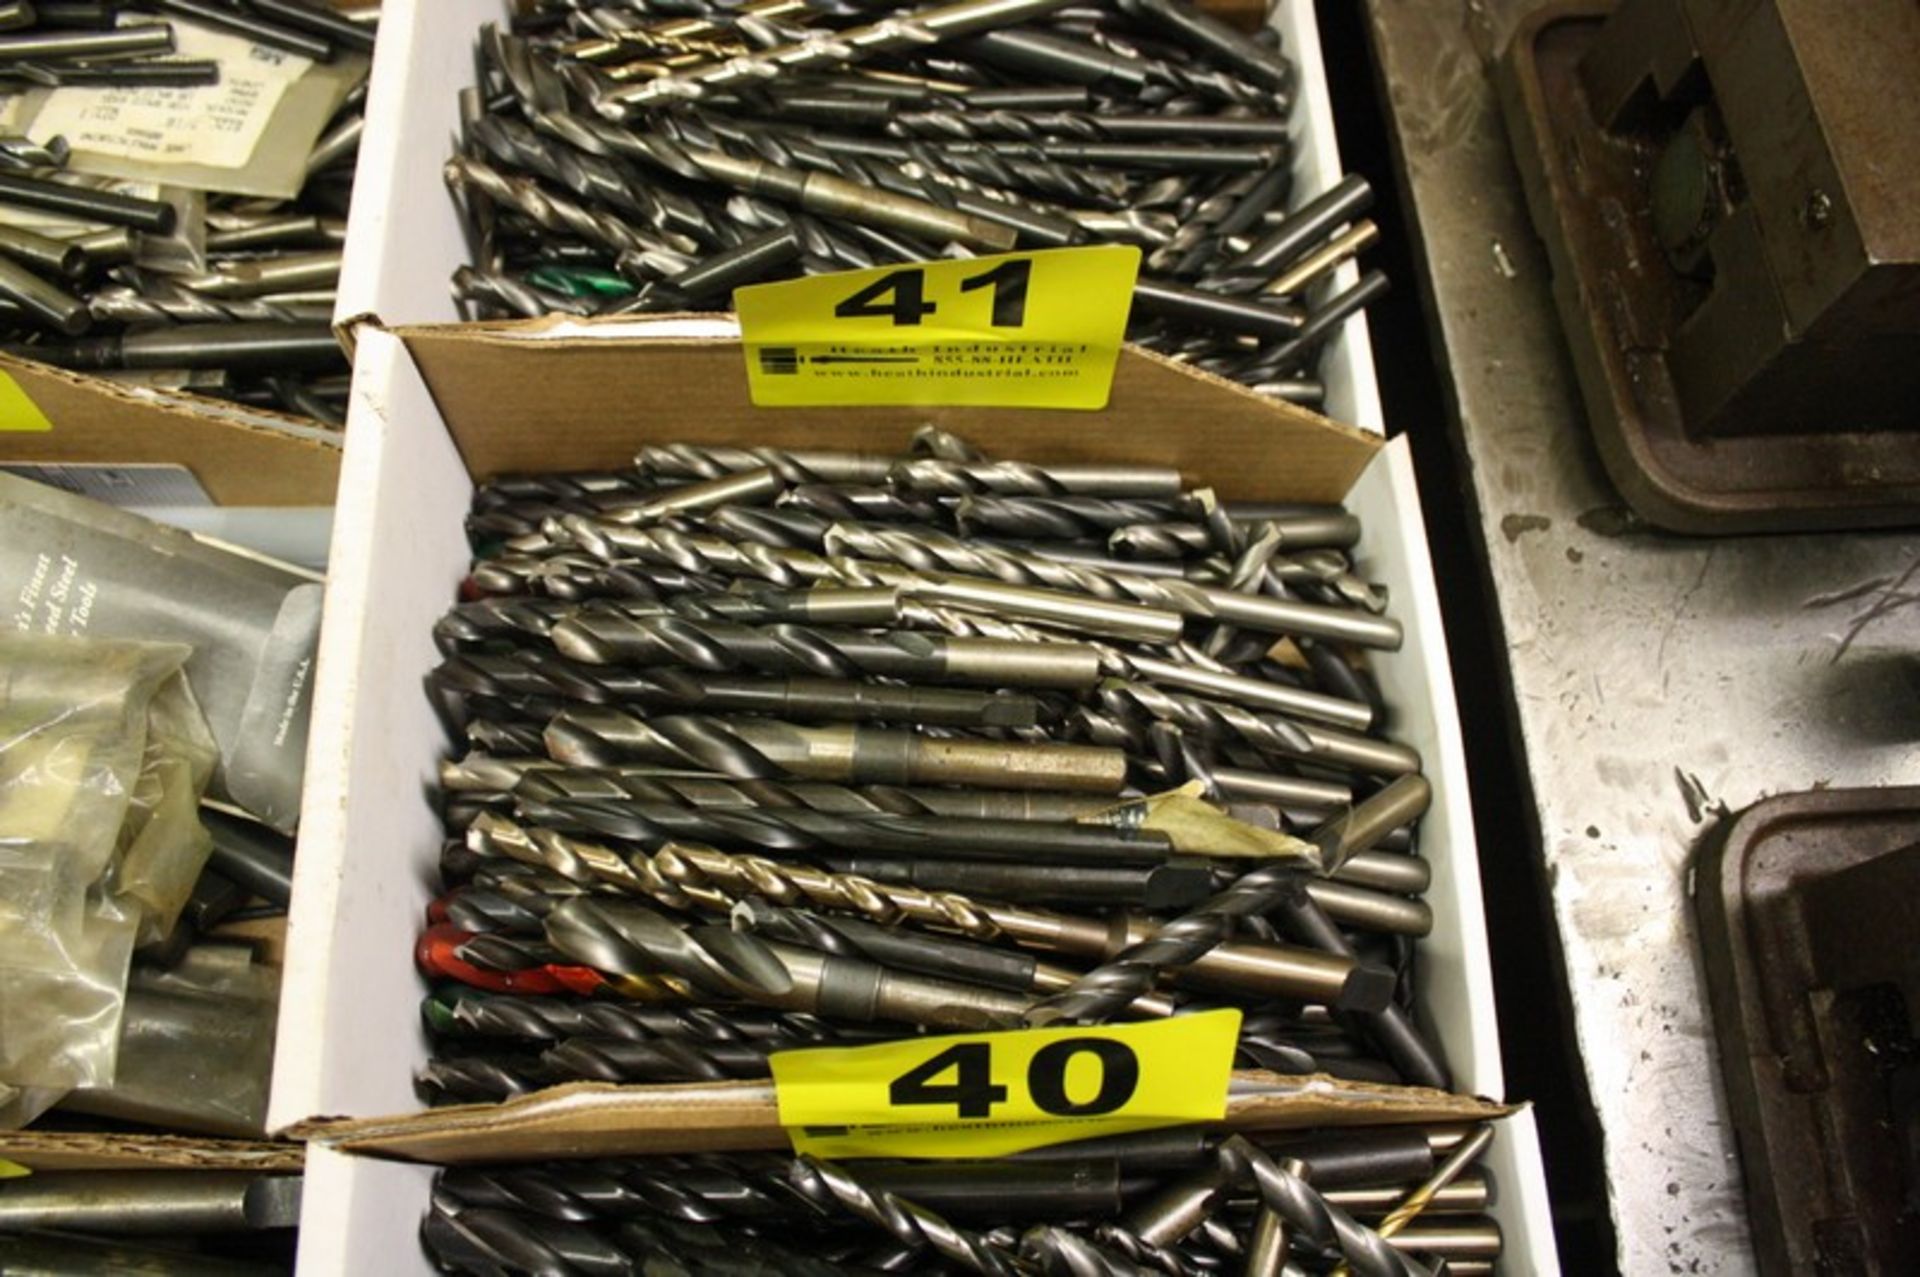 ASSORTED HIGH SPEED STEEL DRILL BITS